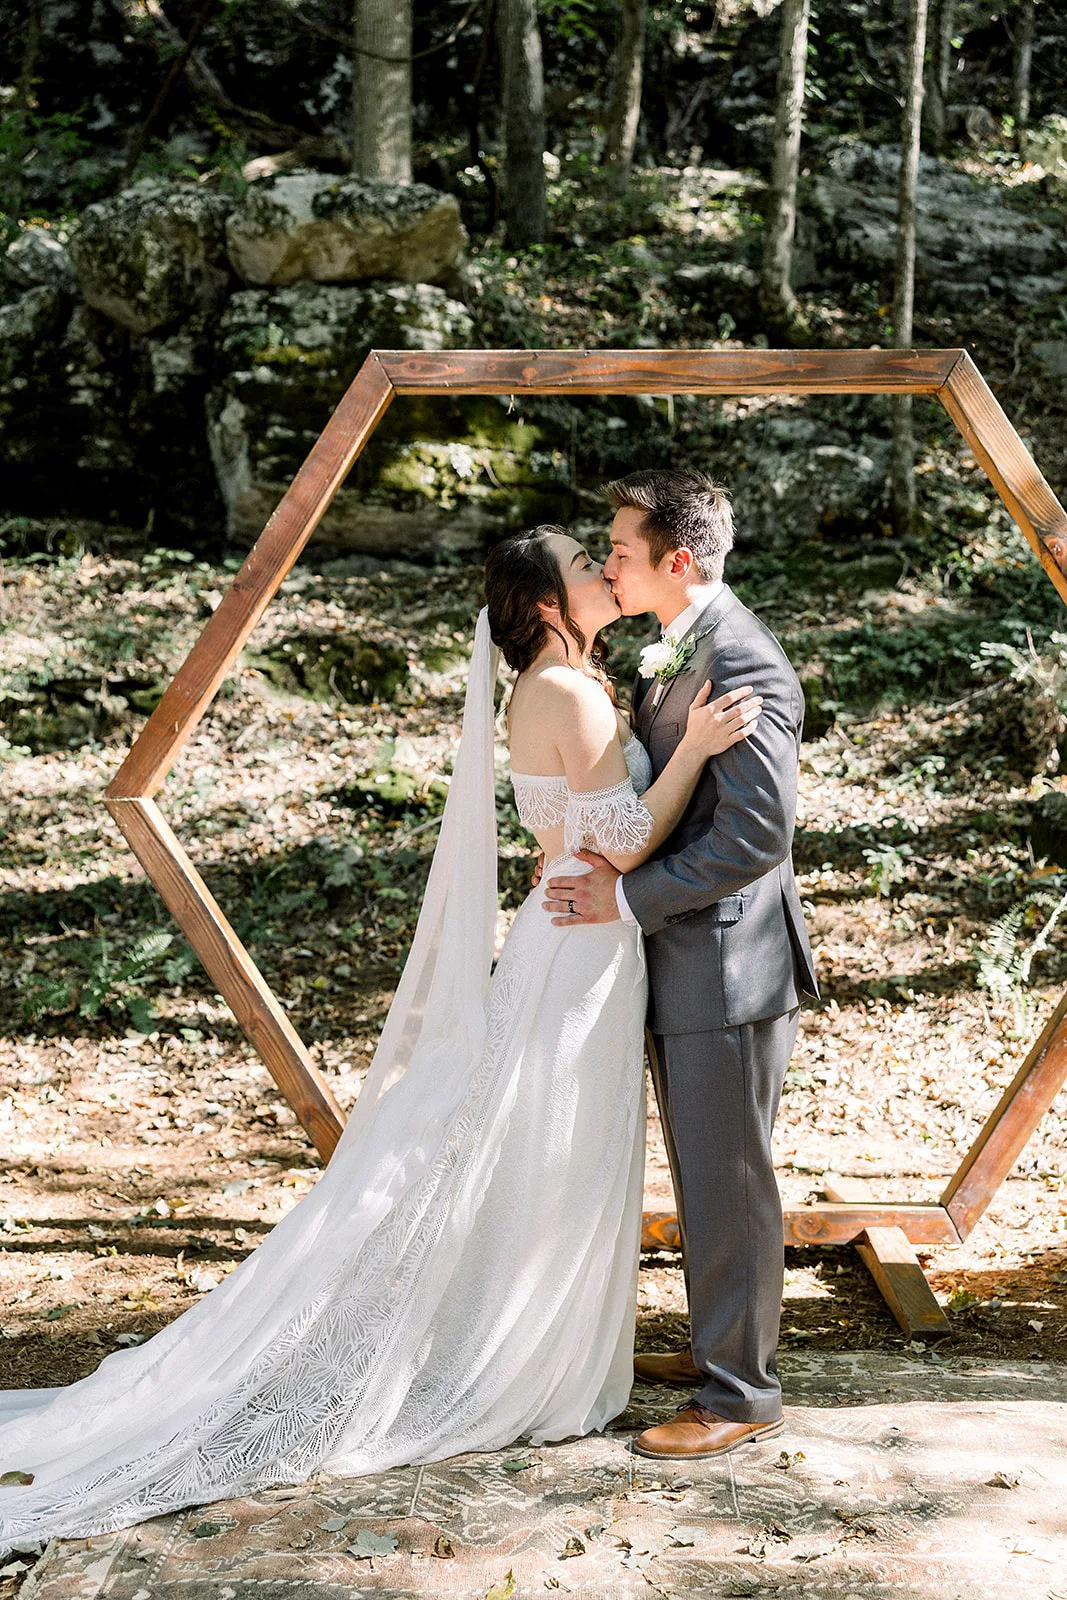 Newlyweds kiss under a wooden beam arbor in the woods to finish their Sustainable Wedding Venue ceremony